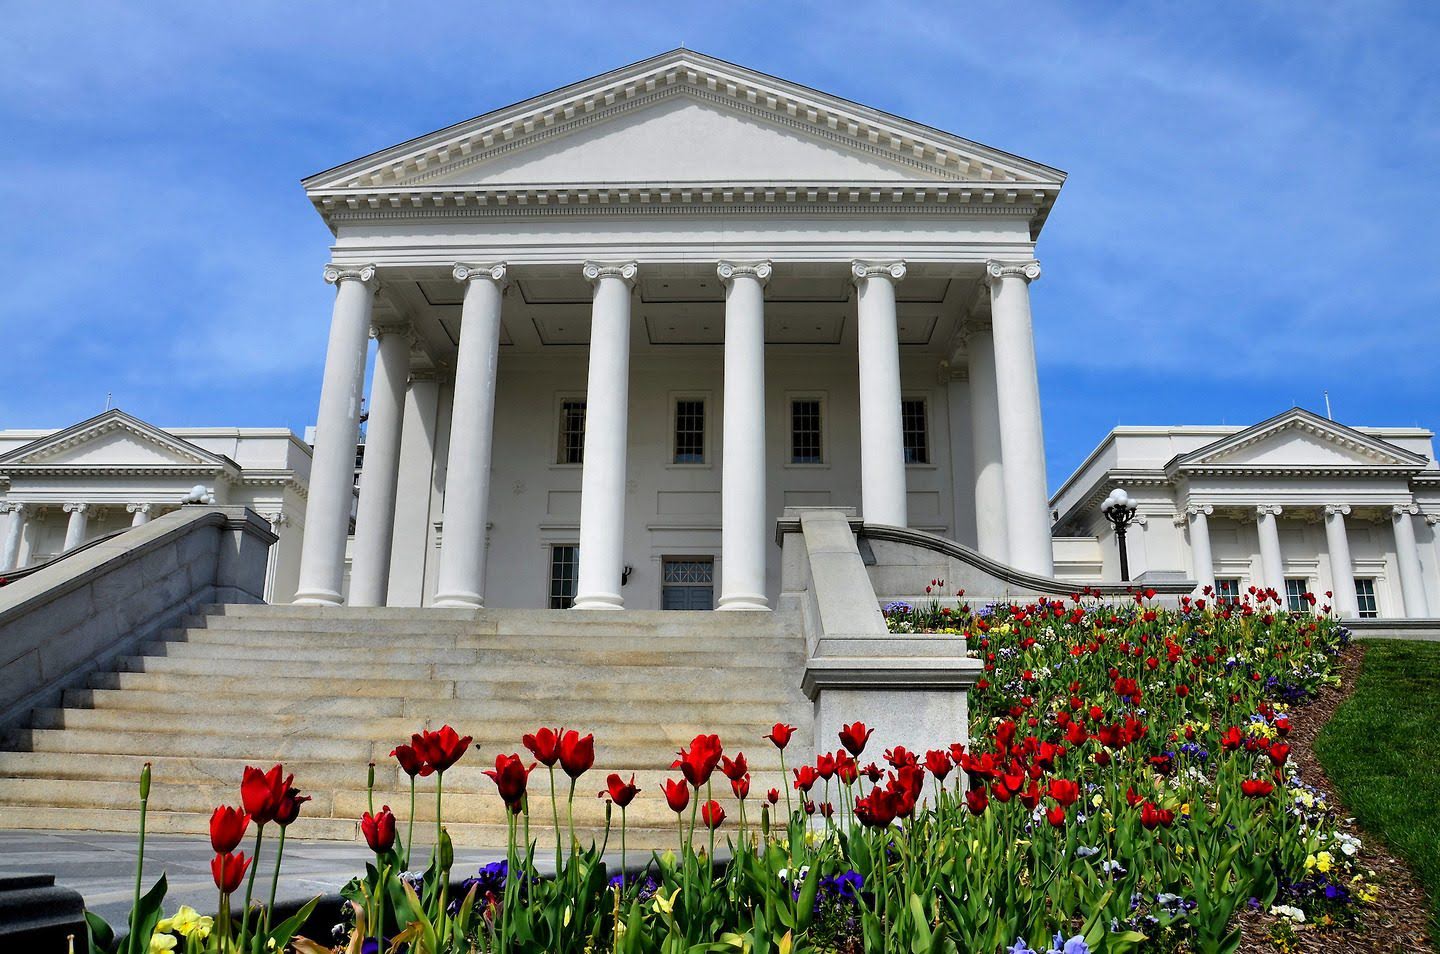 Virginia State Capitol Building in Richmond